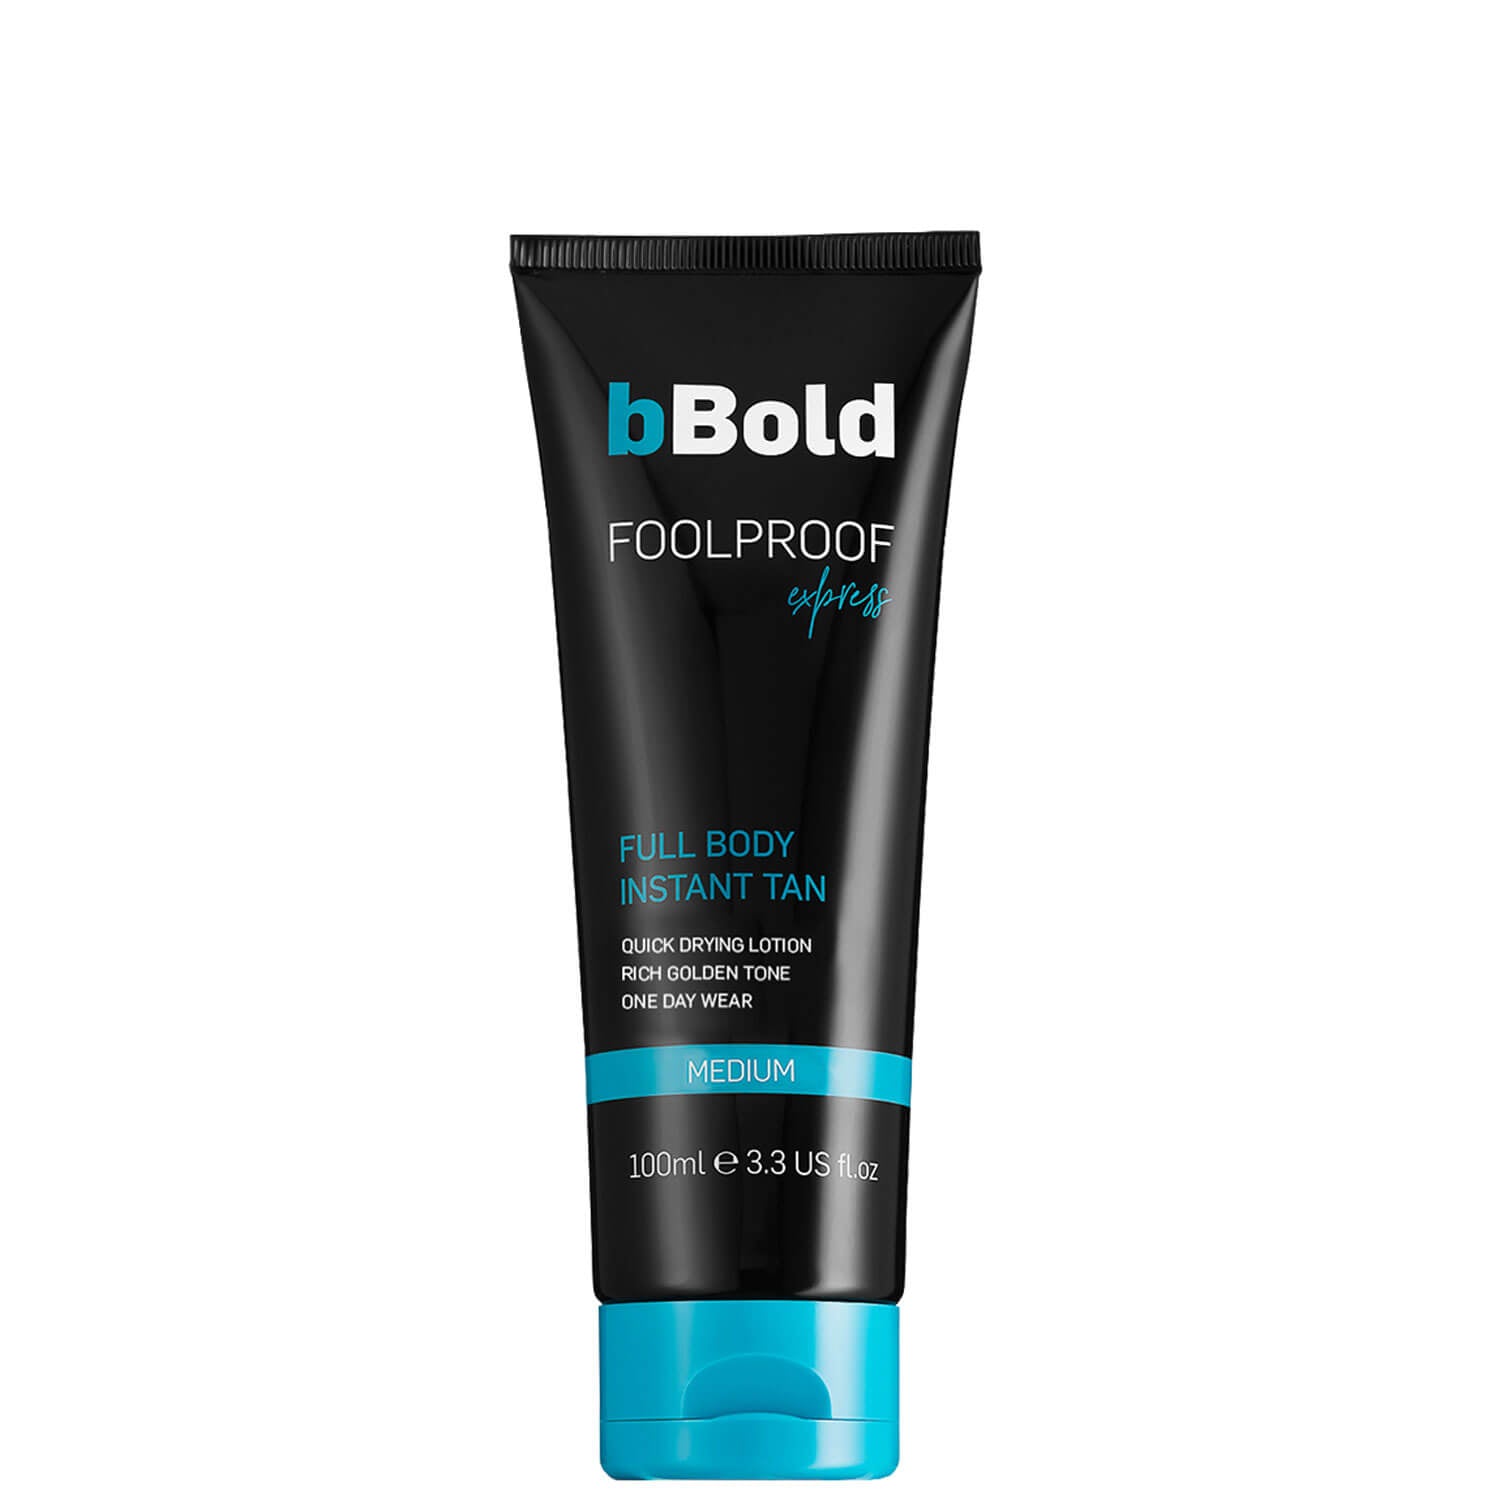 Bbold Foolproof Express Lotion Medium 100ml 1 Shaws Department Stores